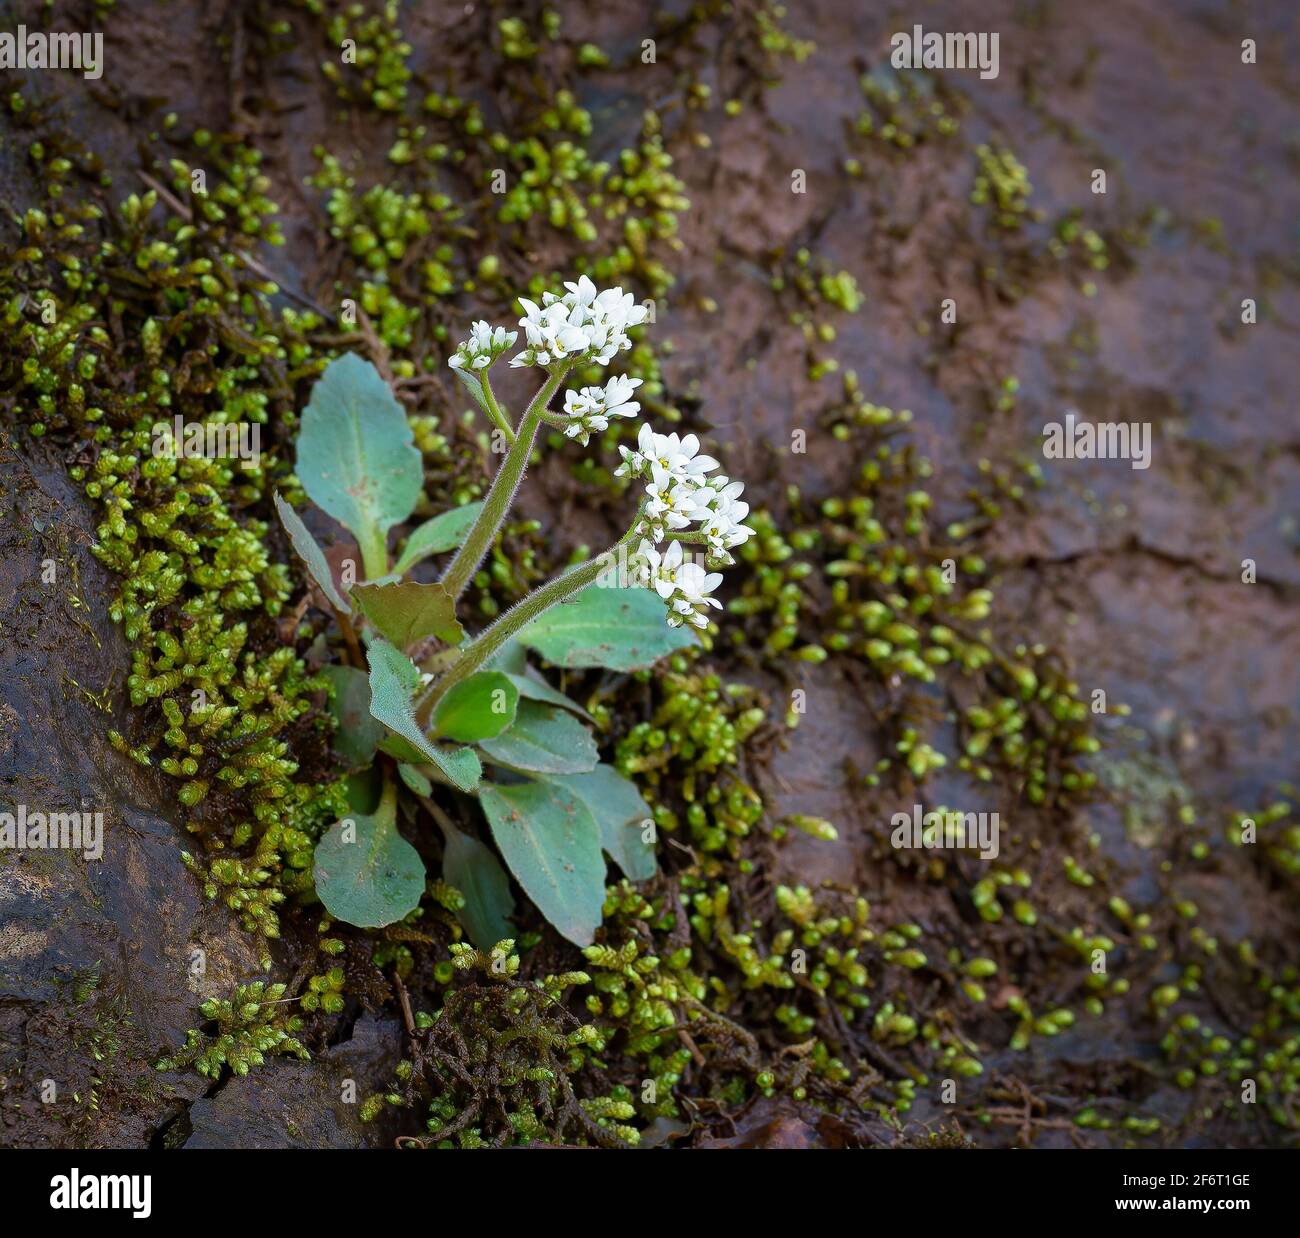 Early saxifrage (Saxifraga virginiensis), a wildflower native to eastern North America, growing from a rocky cliff face, surrounded by moss. Stock Photo